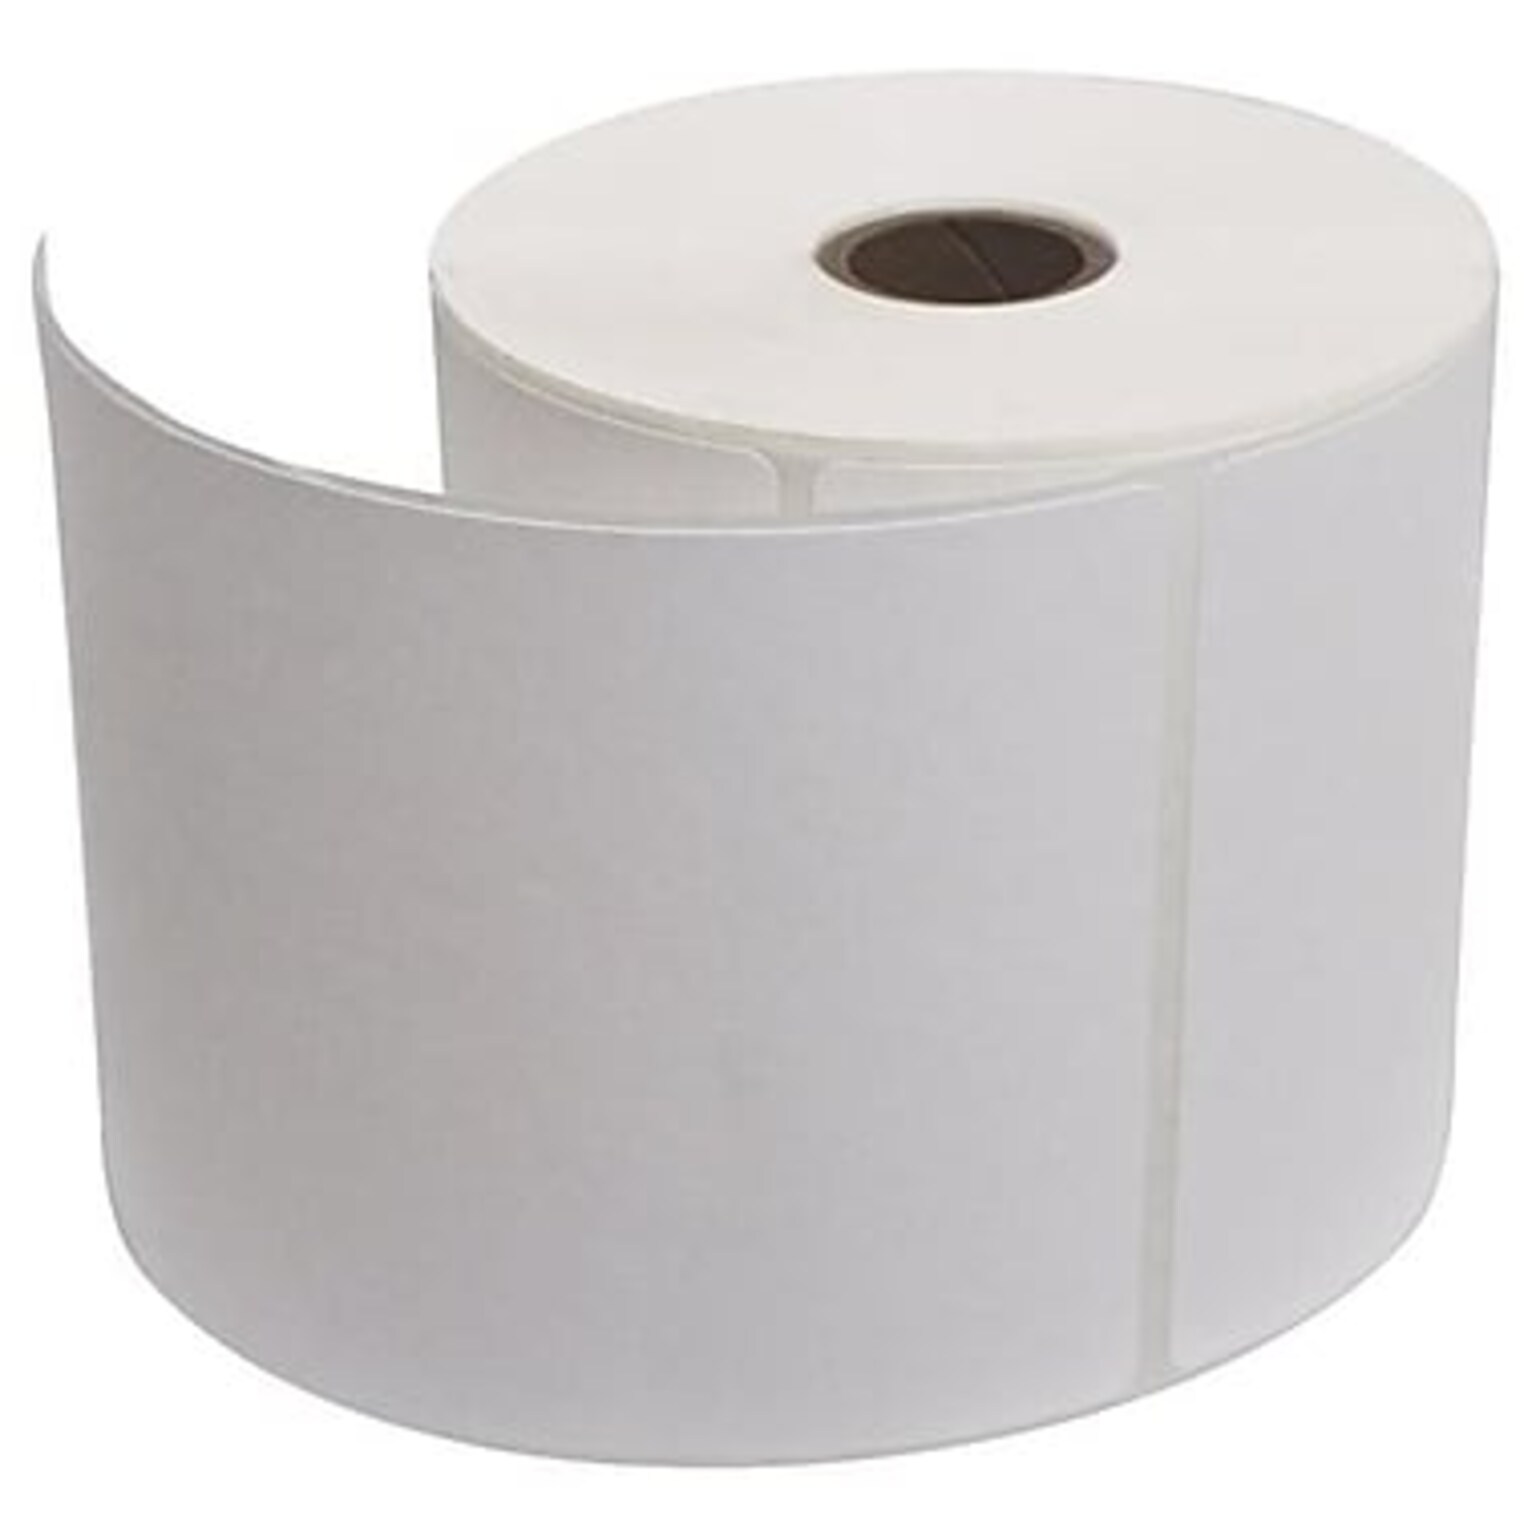 Vangoddy Industrial Thermal Labels, 4 x 6, White, 250 Labels/Roll, 2 Rolls/Pack, 500 Labels/Box (LBL046500)